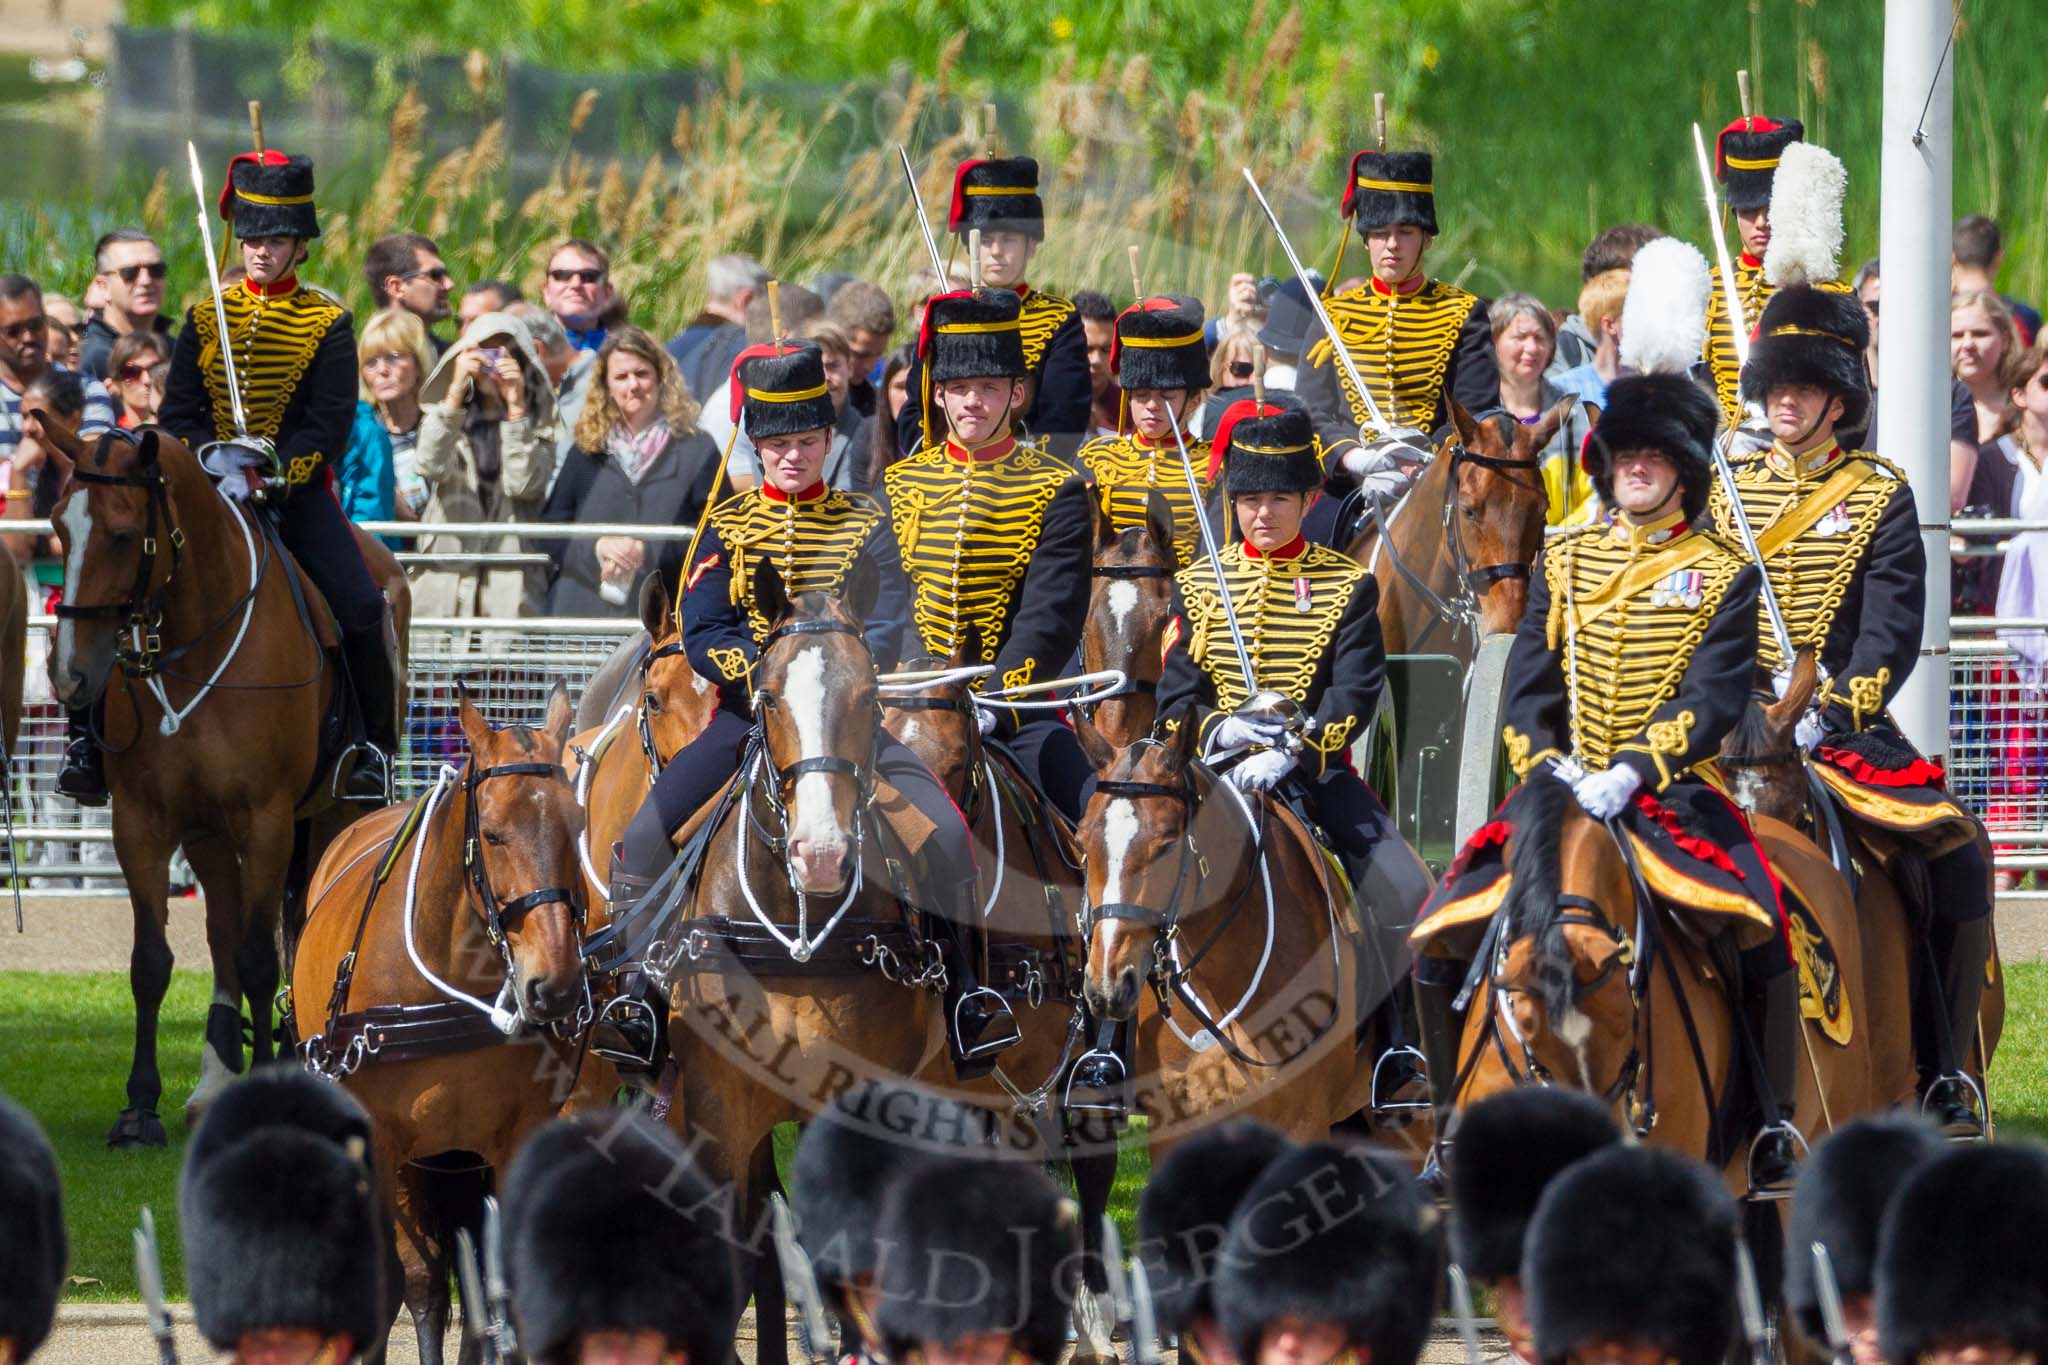 The Colonel's Review 2015.
Horse Guards Parade, Westminster,
London,

United Kingdom,
on 06 June 2015 at 10:48, image #142